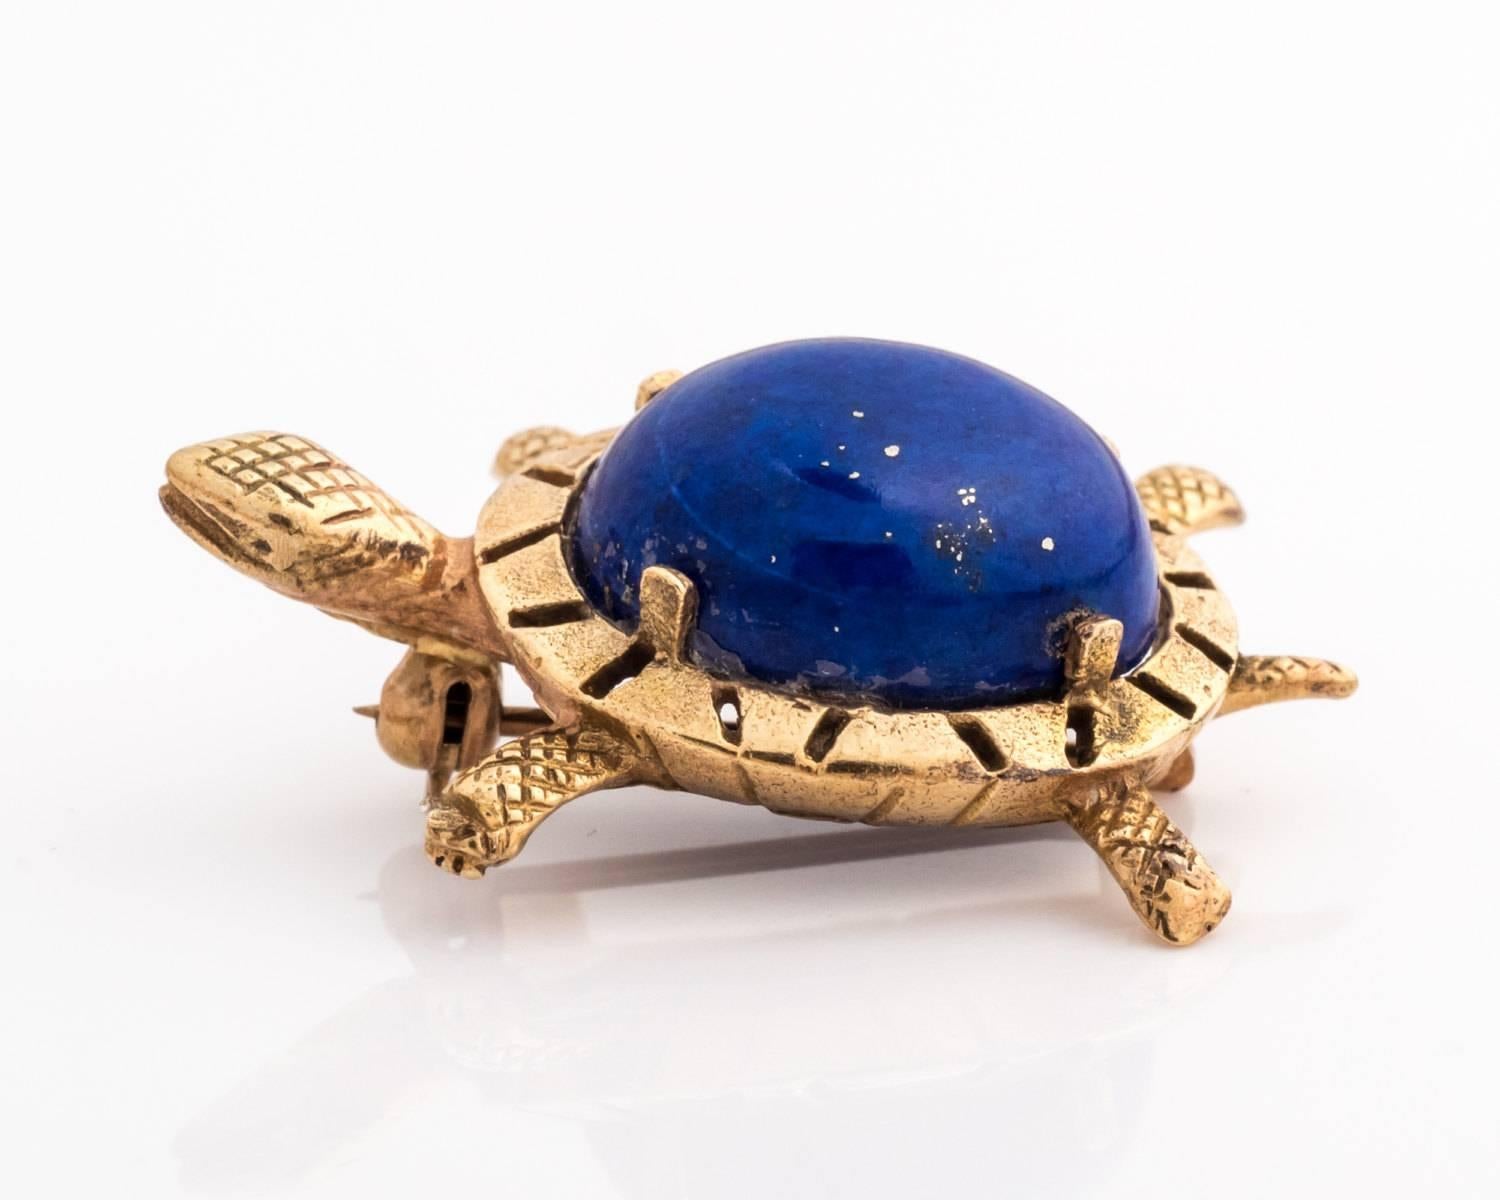 1970s Vintage Blue Lapis Cabochon and 14 Karat Yellow Gold Sea Turtle Brooch. Features a 4-prong set oval Lapis cabochon and hand etched carvings on the head, legs, tail and shell border. The lapis has a very thin crack on the right side and